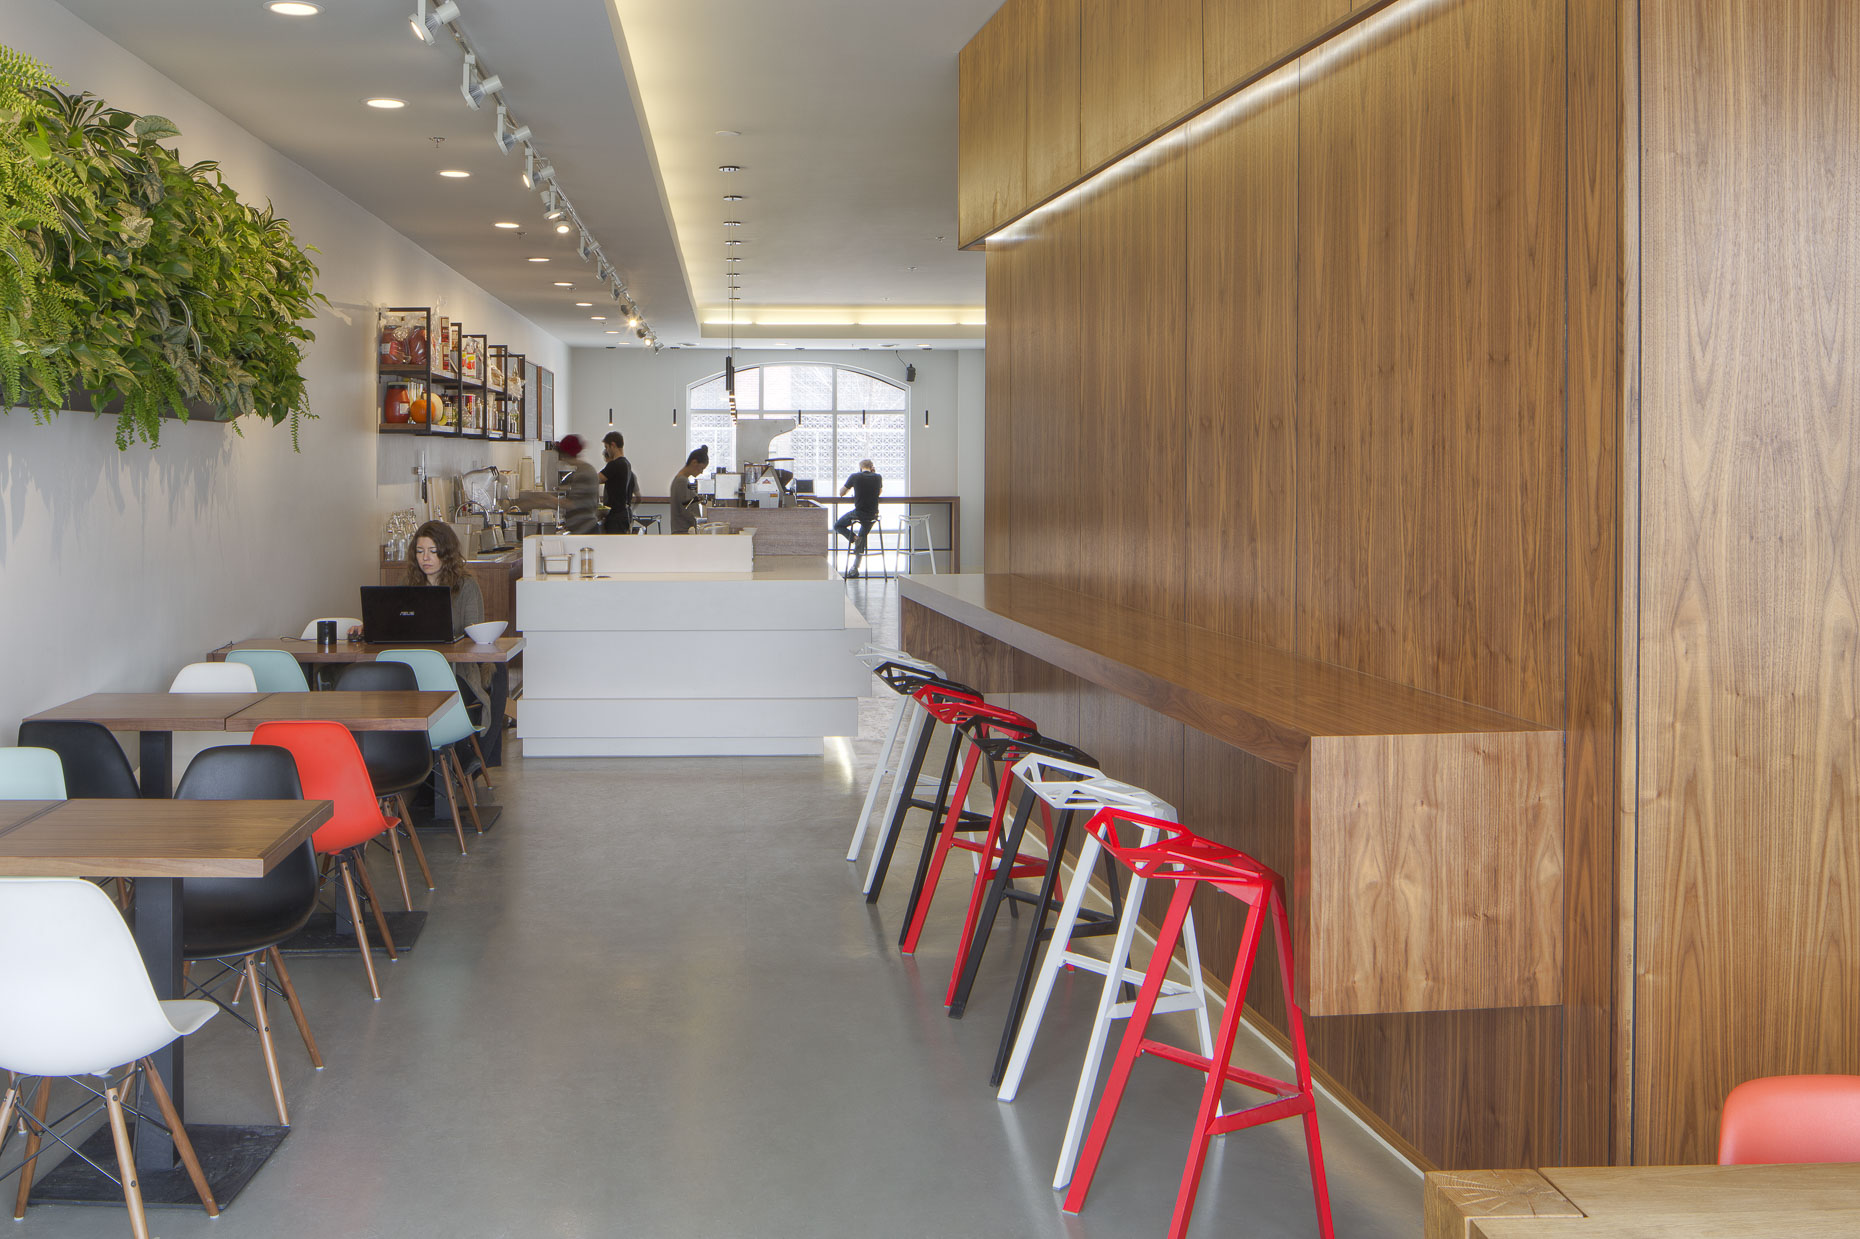 Alchemy Juice Bar & Cafe by Tim Lai Architect photographed by Brad Feinknopf based in Columbus, Ohio